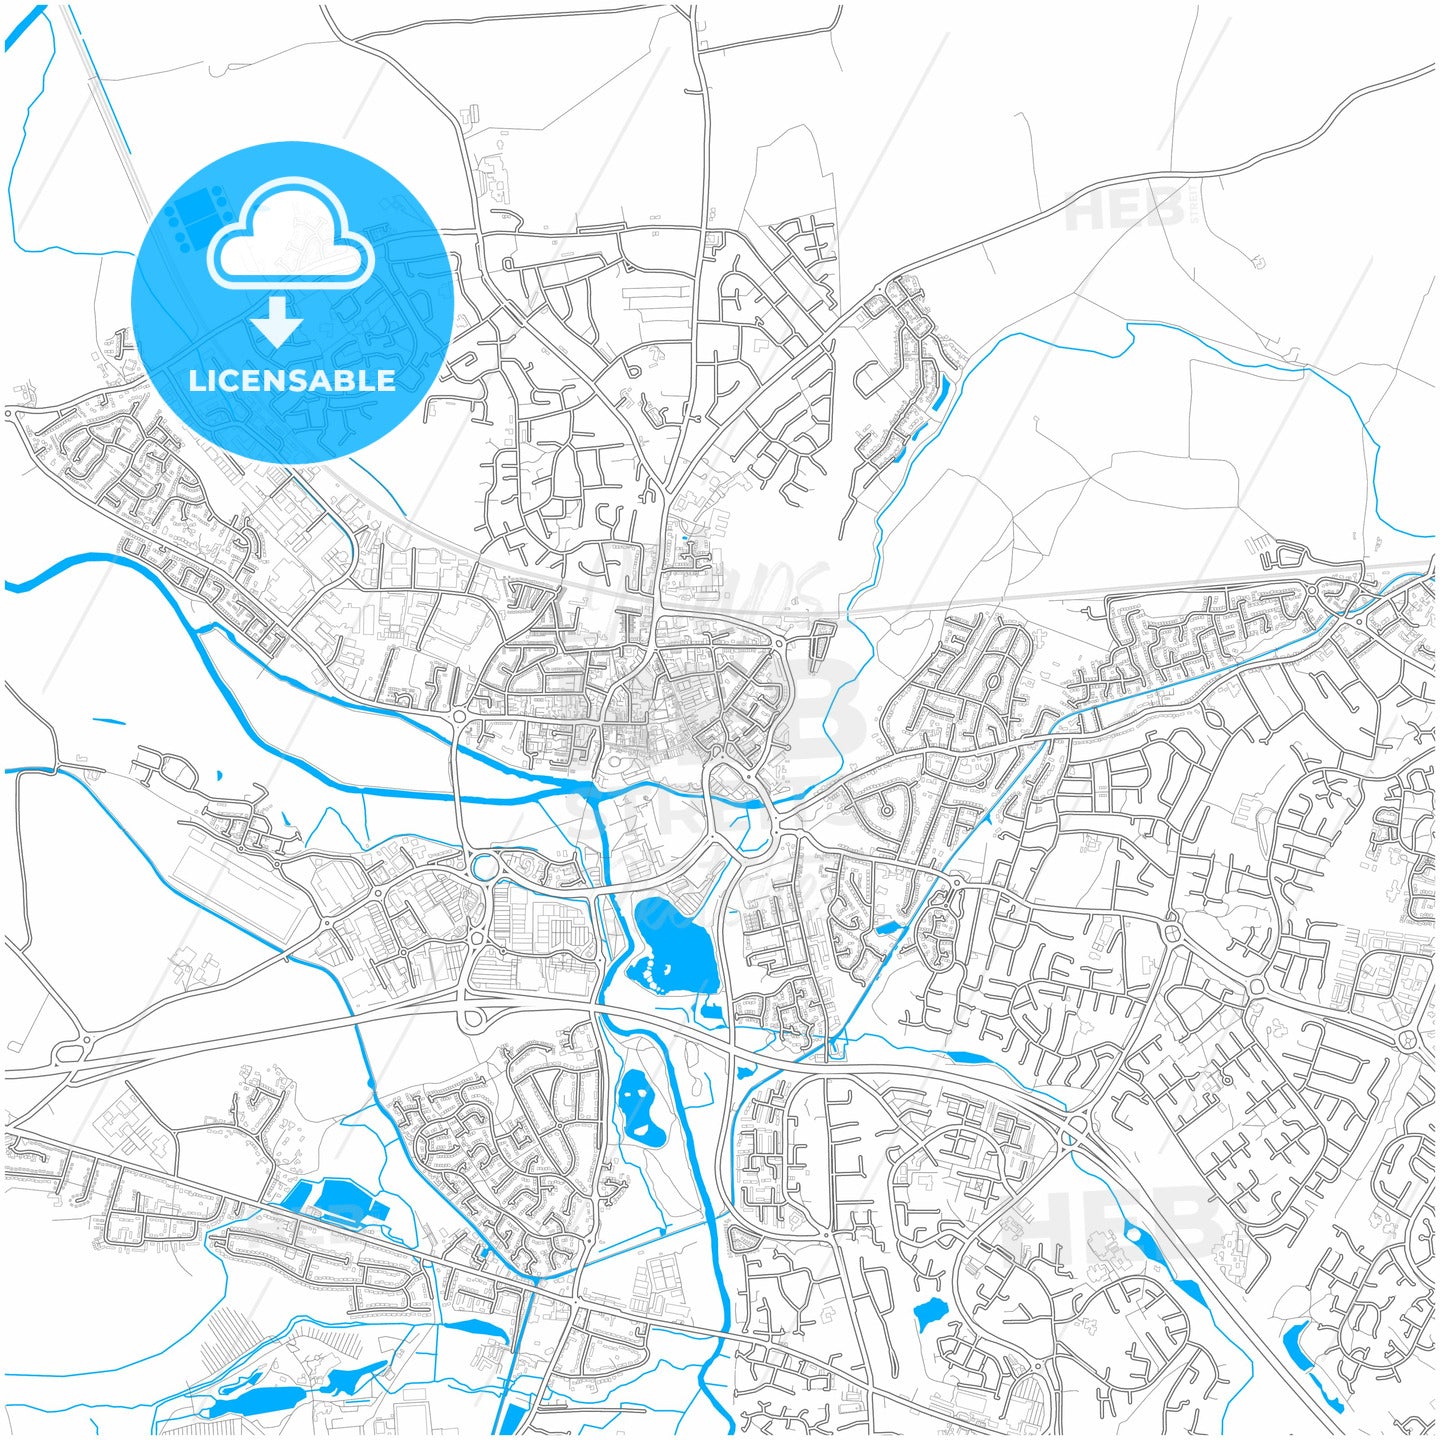 Tamworth, West Midlands, England, city map with high quality roads.